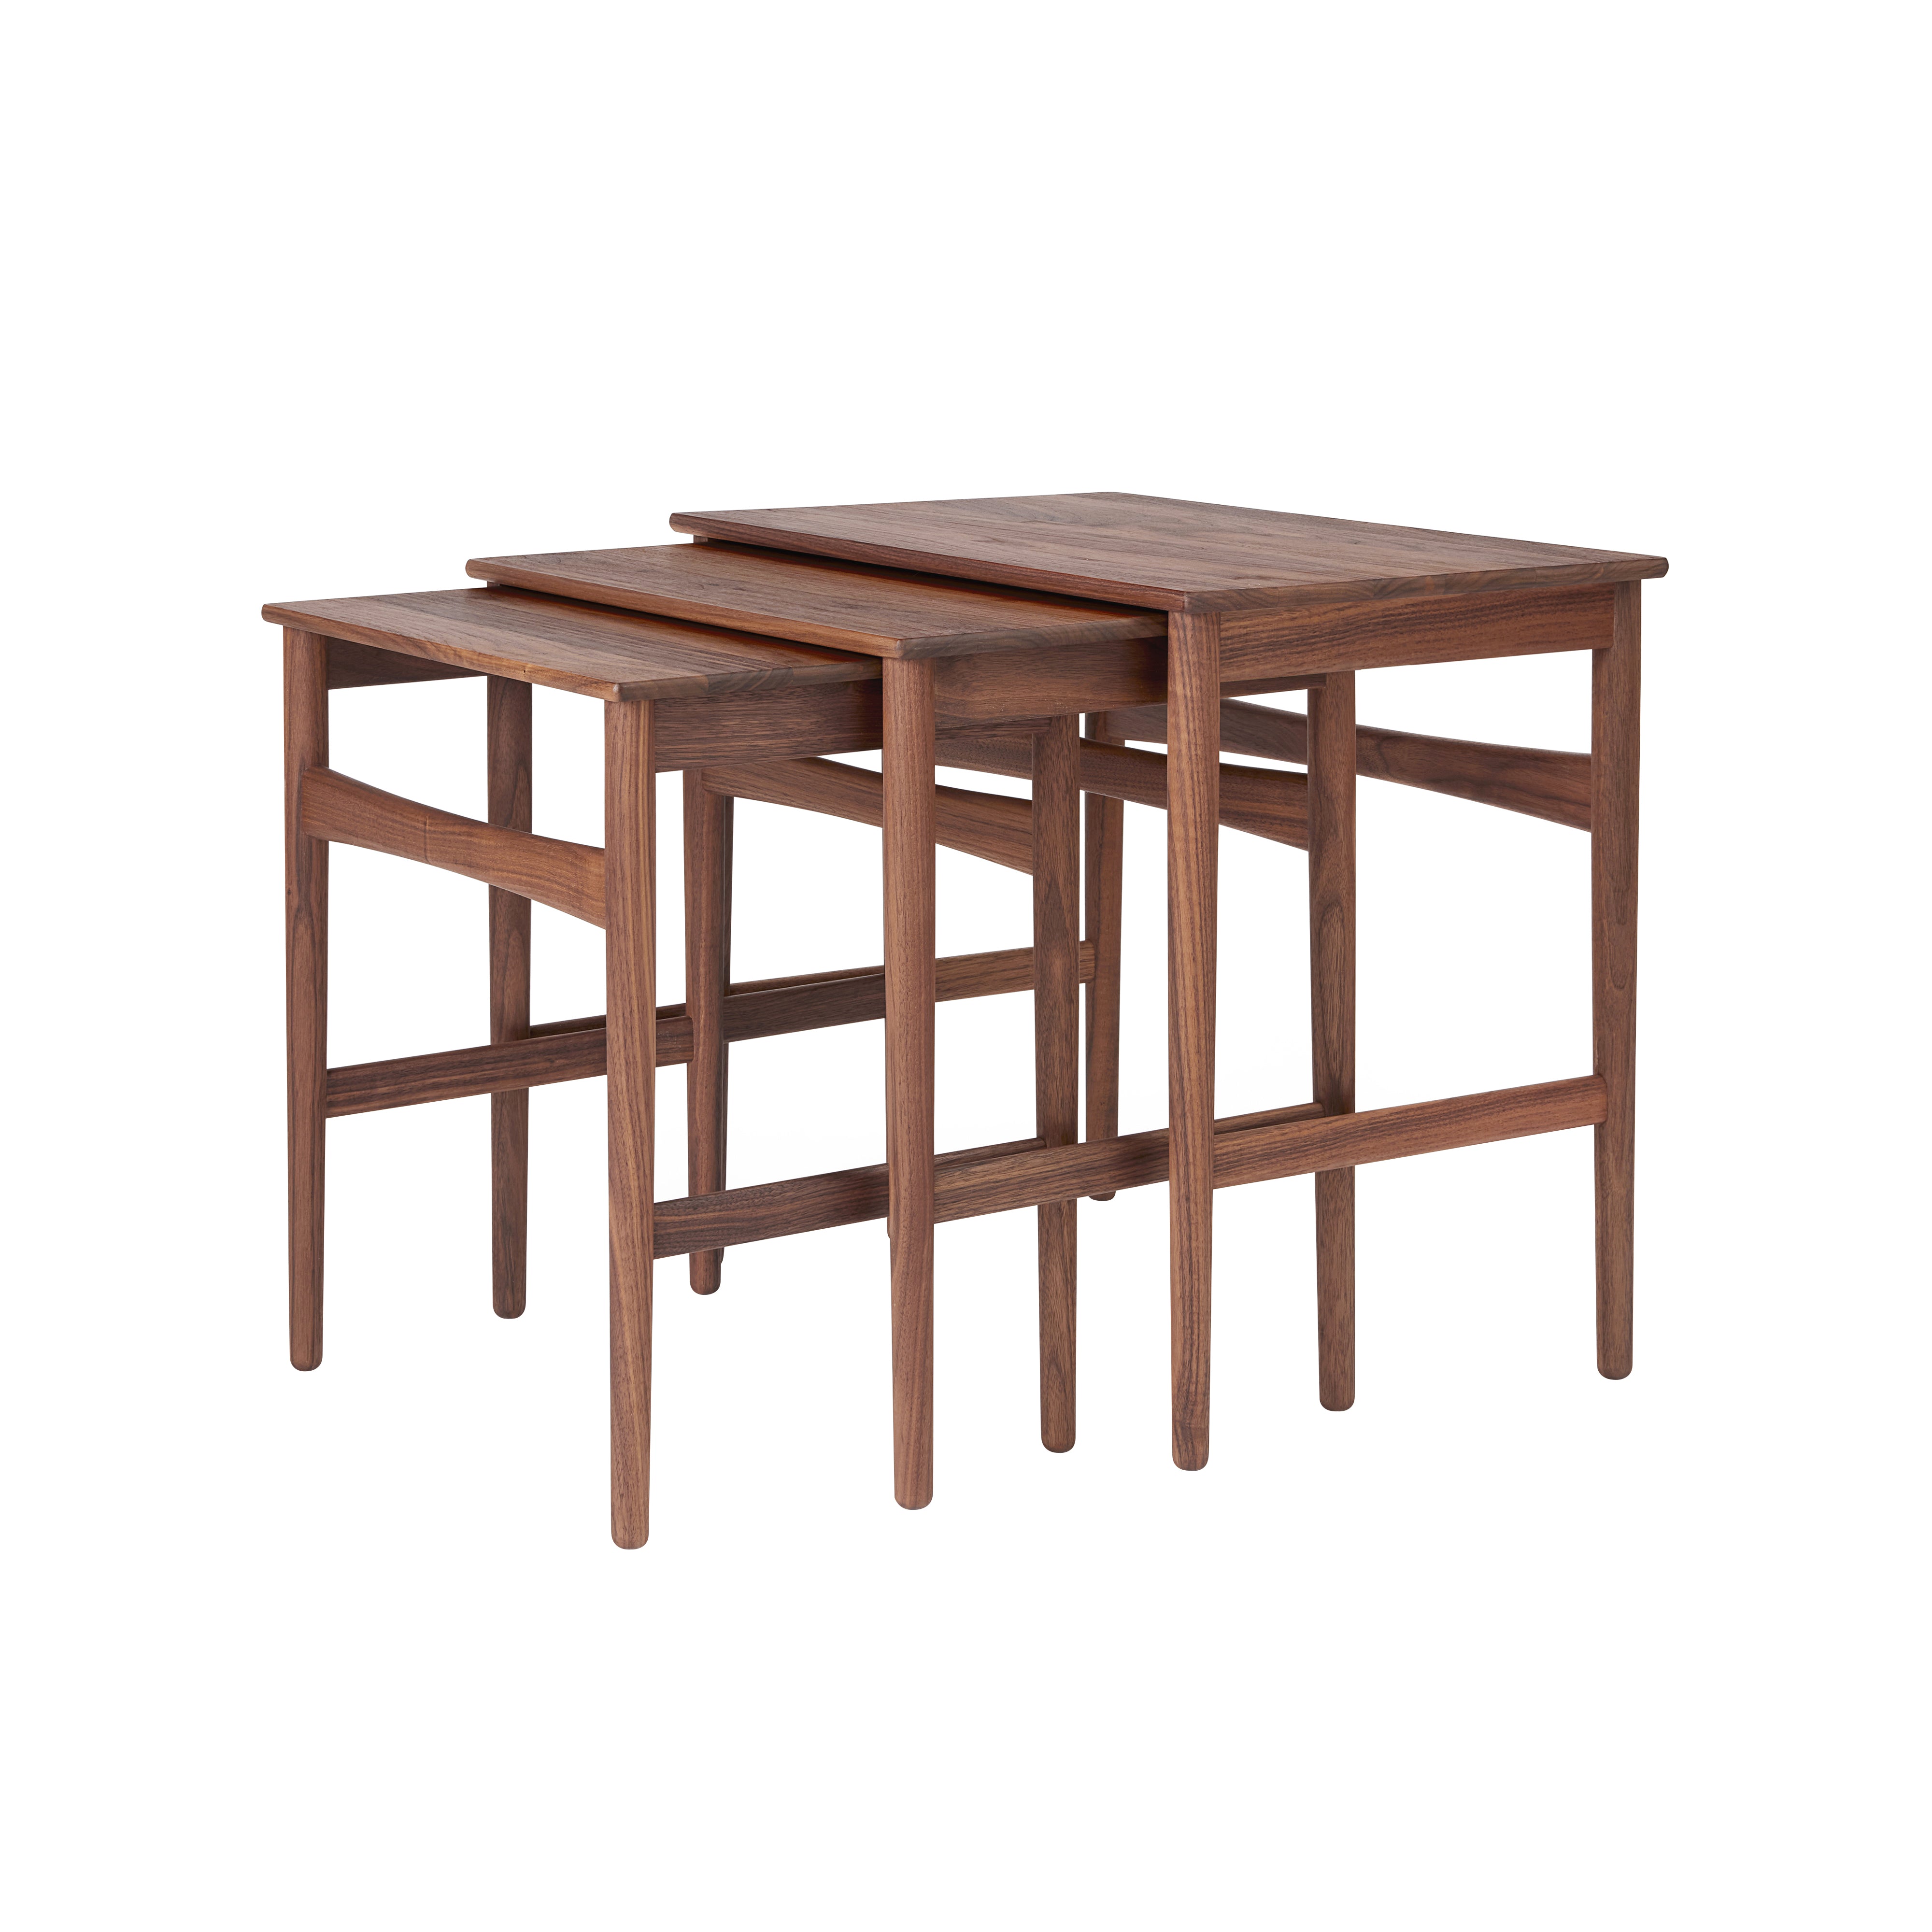 CH004 Nesting Tables: Set of 3 + Oiled Walnut